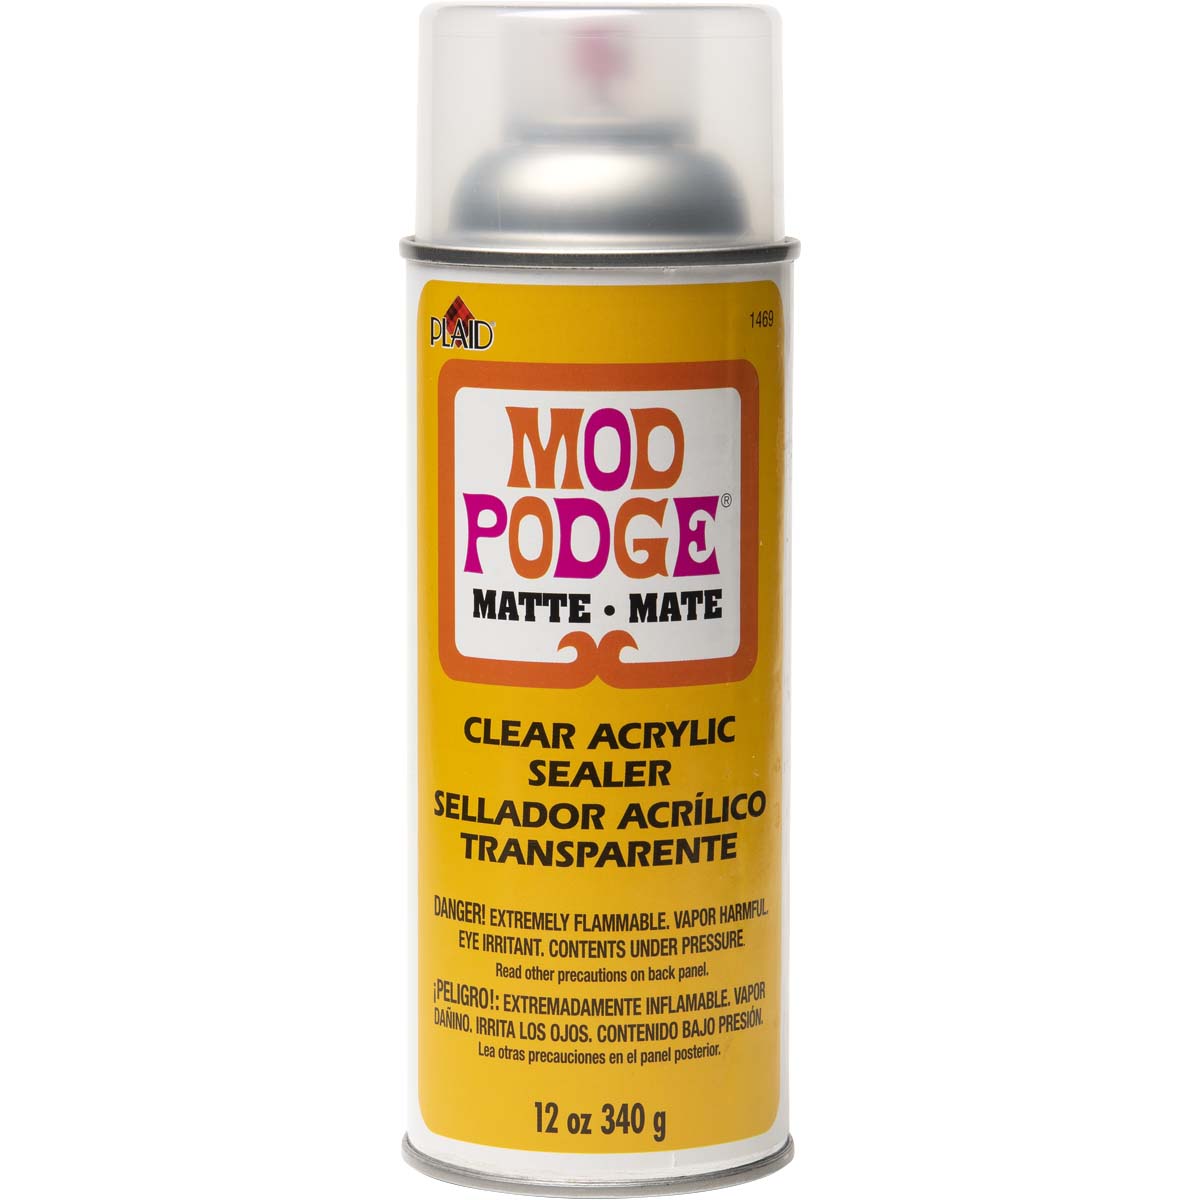 Does Mod Podge Dry Clear